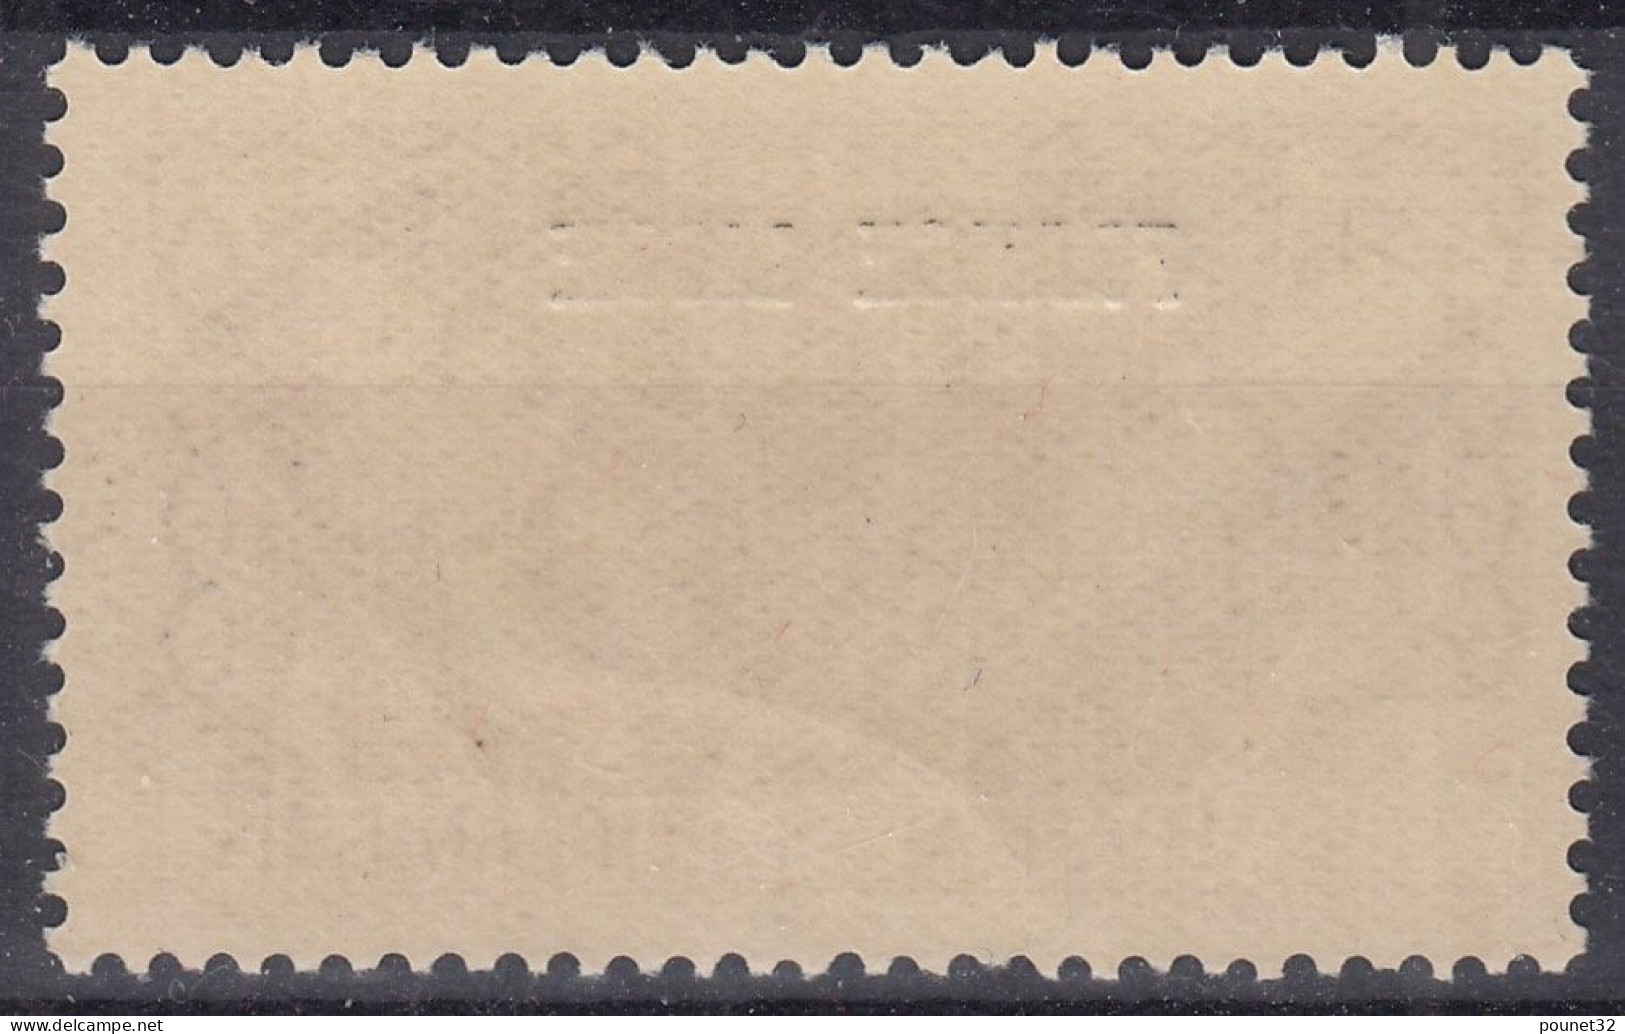 TIMBRE OCEANIE FRANCE LIBRE N° 144 NEUF GOMME COLONIALE SANS CHARNIERE - Neufs